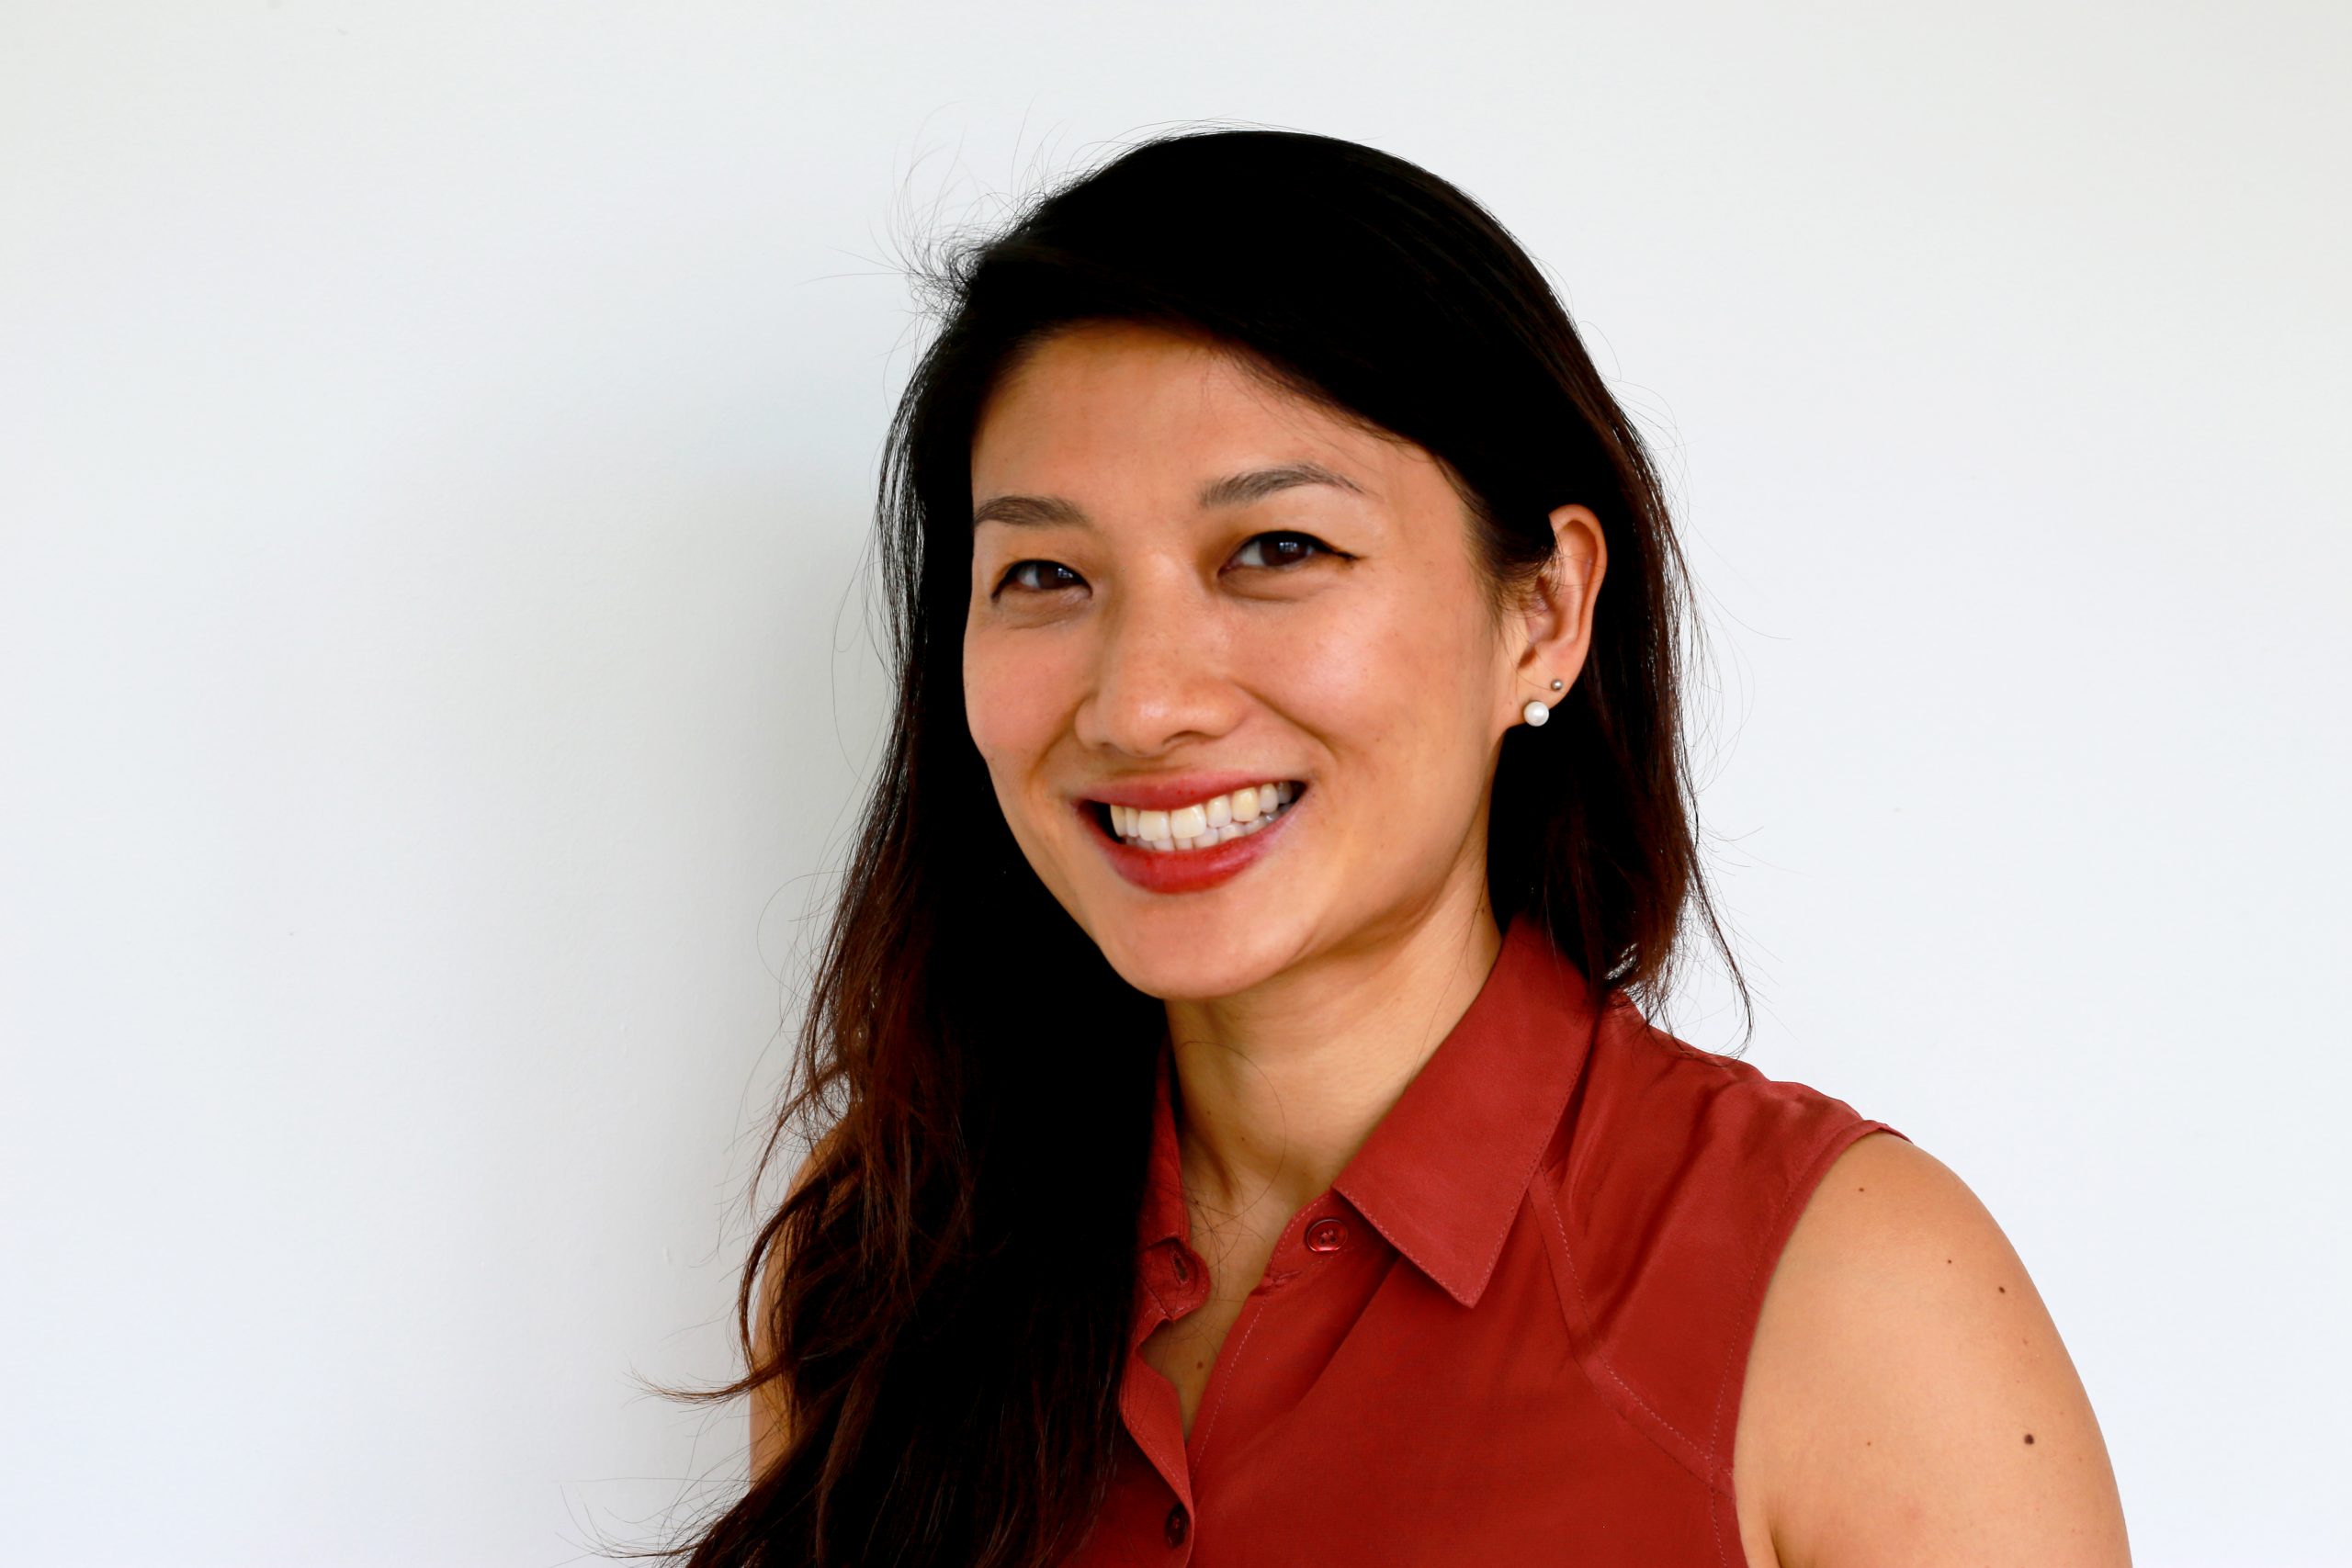 [Tuning In] Christine Wang, Head of Asia at Lufthansa Innovation Hub, is a polyglot career woman who pushes her own boundaries with curiosity